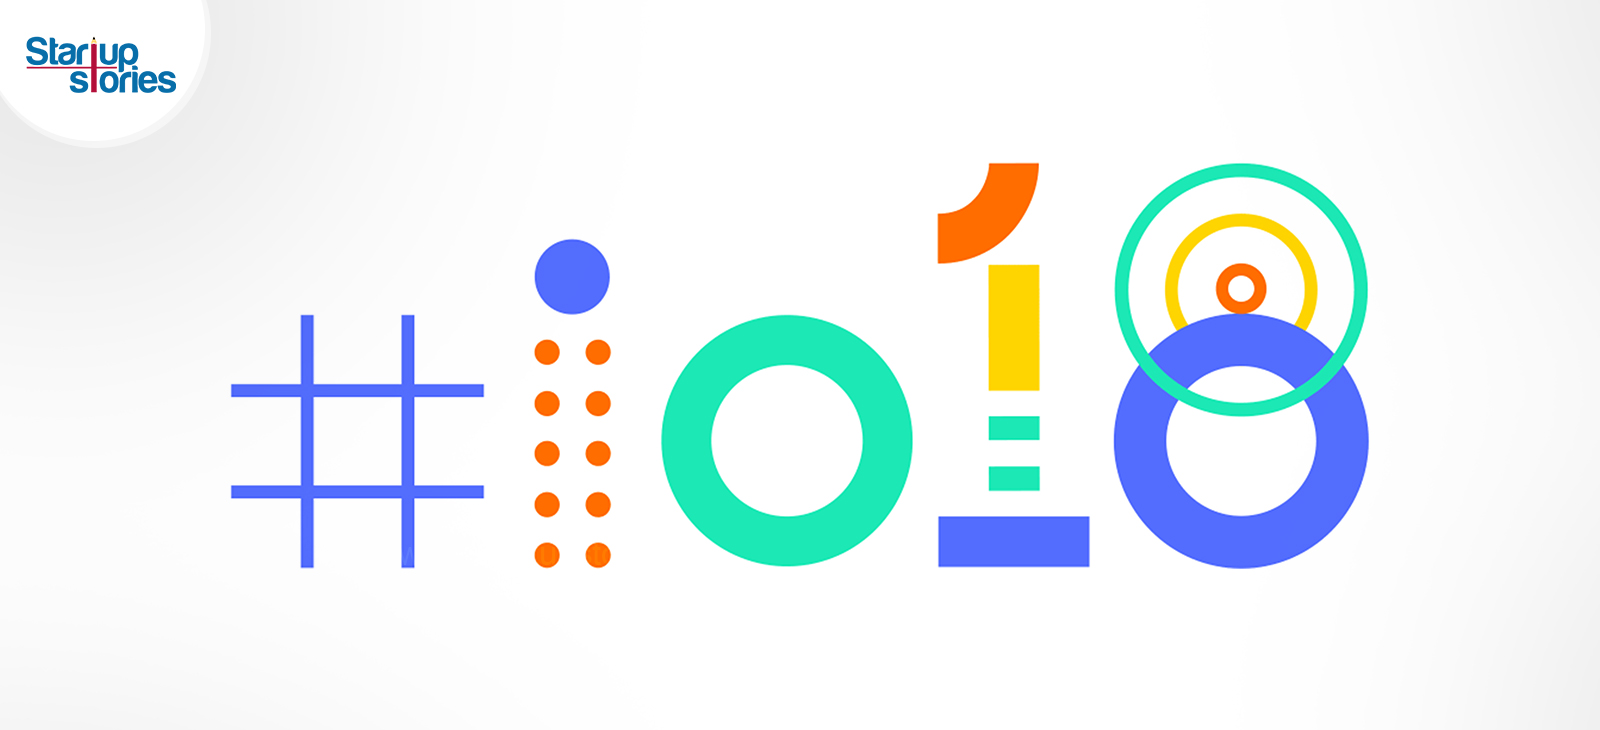 10 Years Of Google I/O Here What To Expect,Startup News India,startup stories,Featured,Google I/O 2018 Preview,Google I/O 2018, Google I/O latest updates,Google developer festival 2018,Google I/O stands for input/output,Google I/O expectations,Google developer festival updates